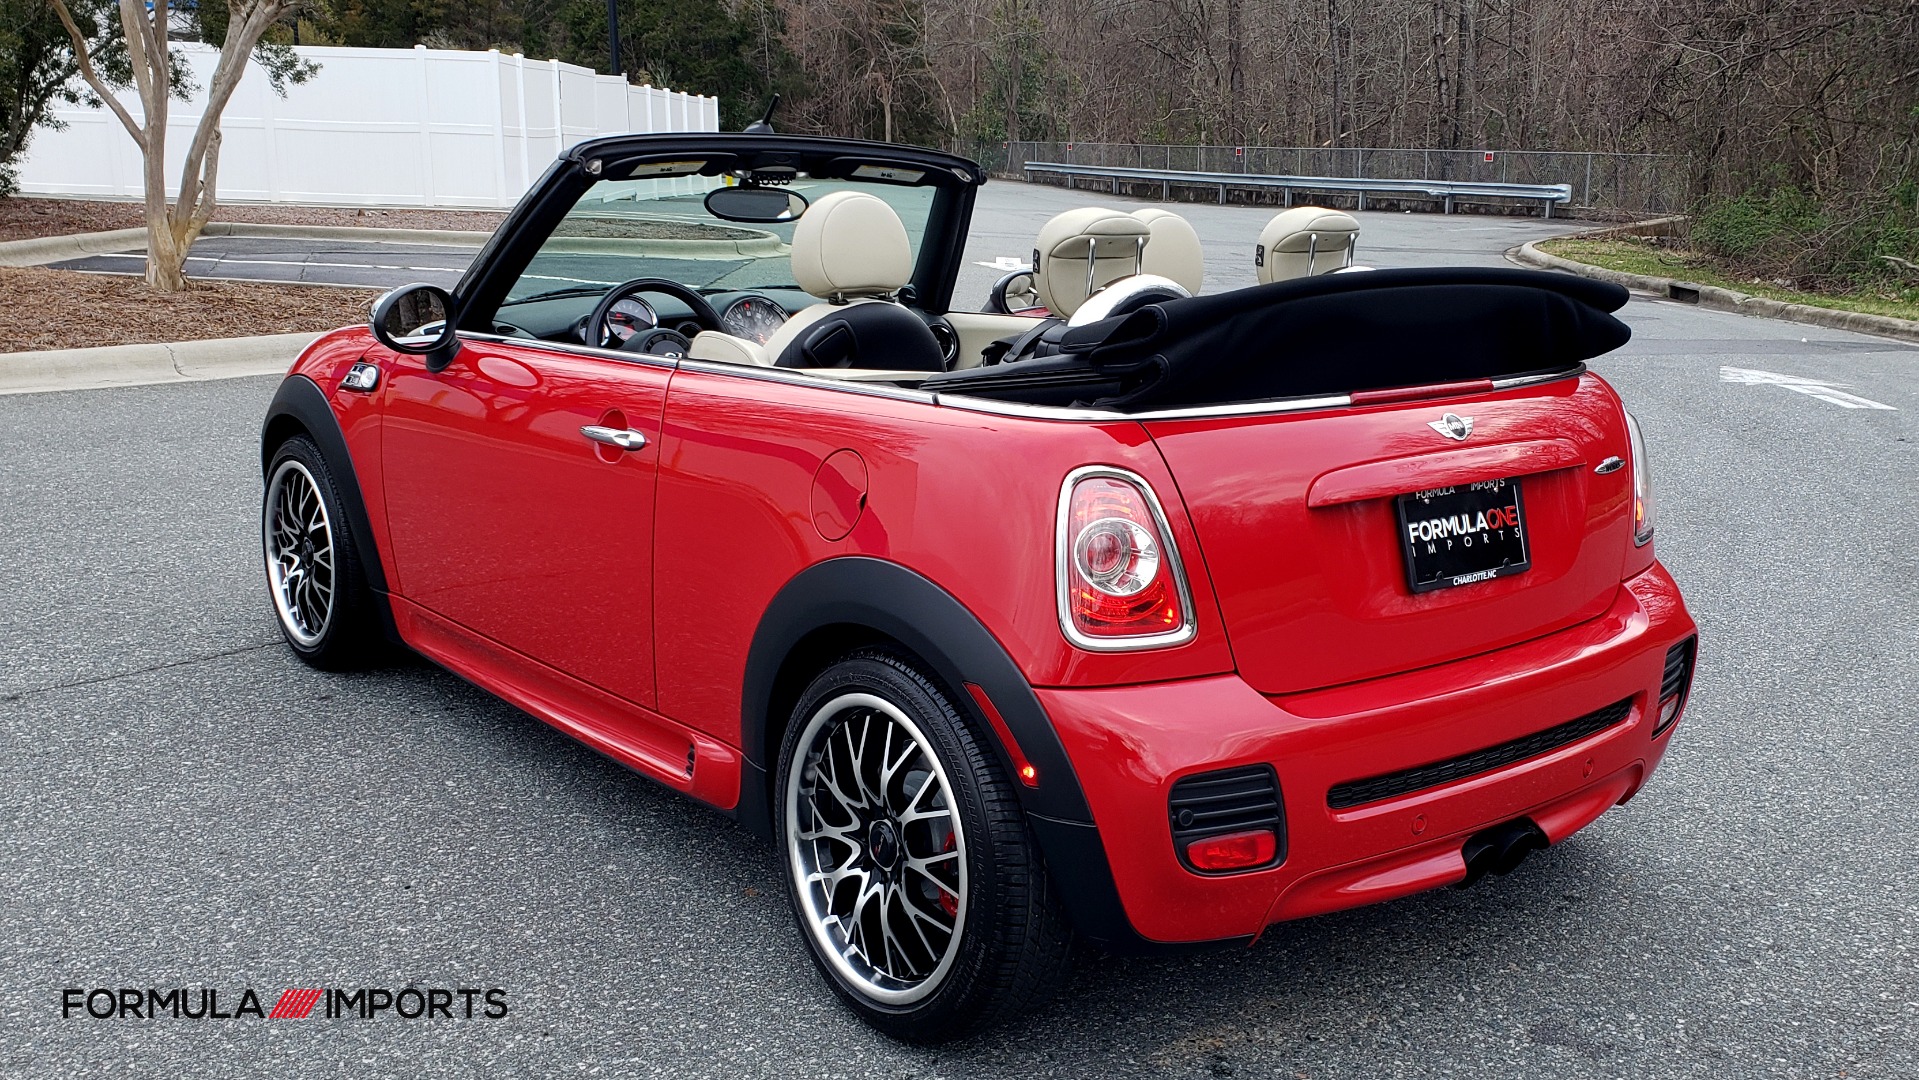 Used 2012 MINI COOPER JOHN COOPER WORKS CONVERTIBLE for sale Sold at Formula Imports in Charlotte NC 28227 8